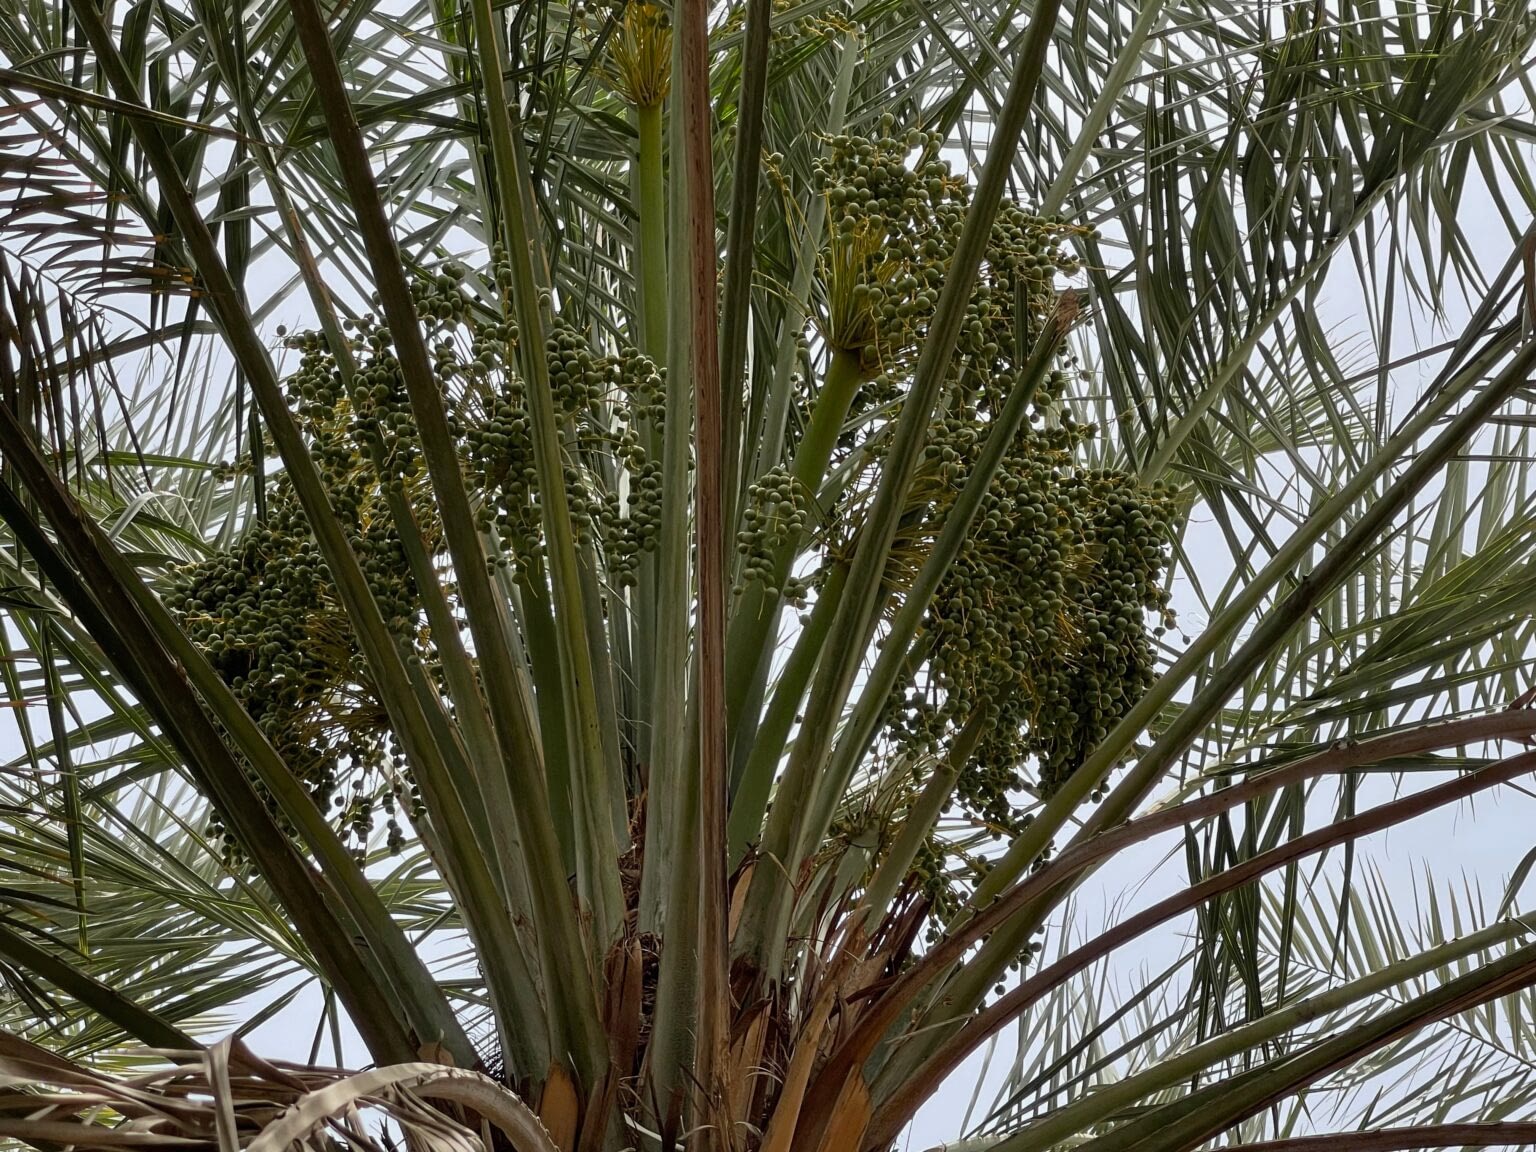 Dates growing in a date palm tree.